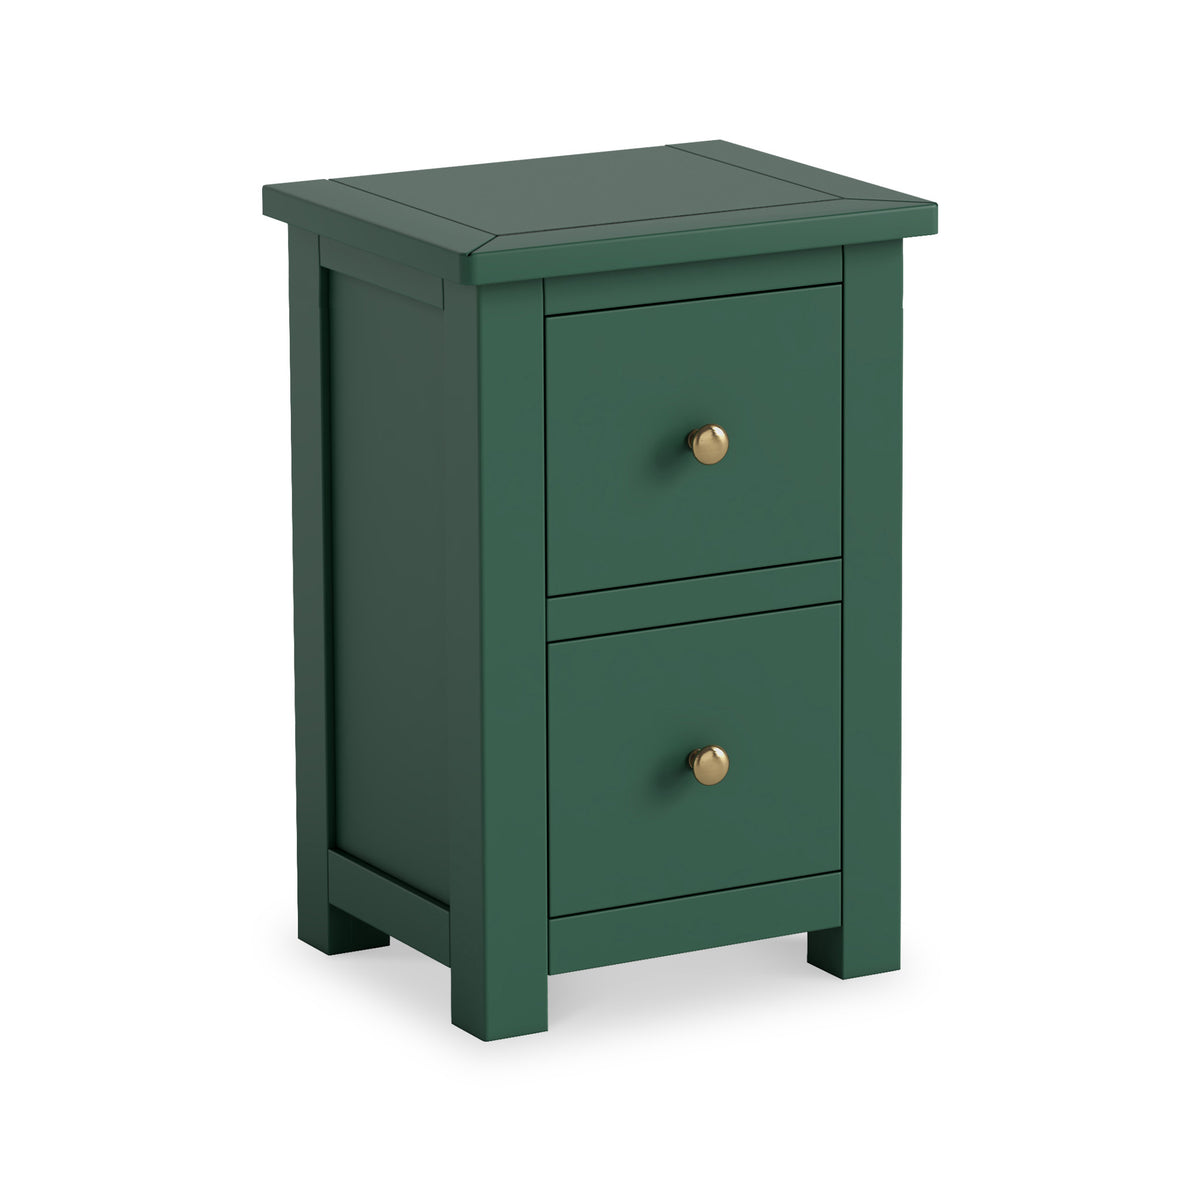 Duchy Puck Green 2 Drawer Bedside Table from Roseland Furniture